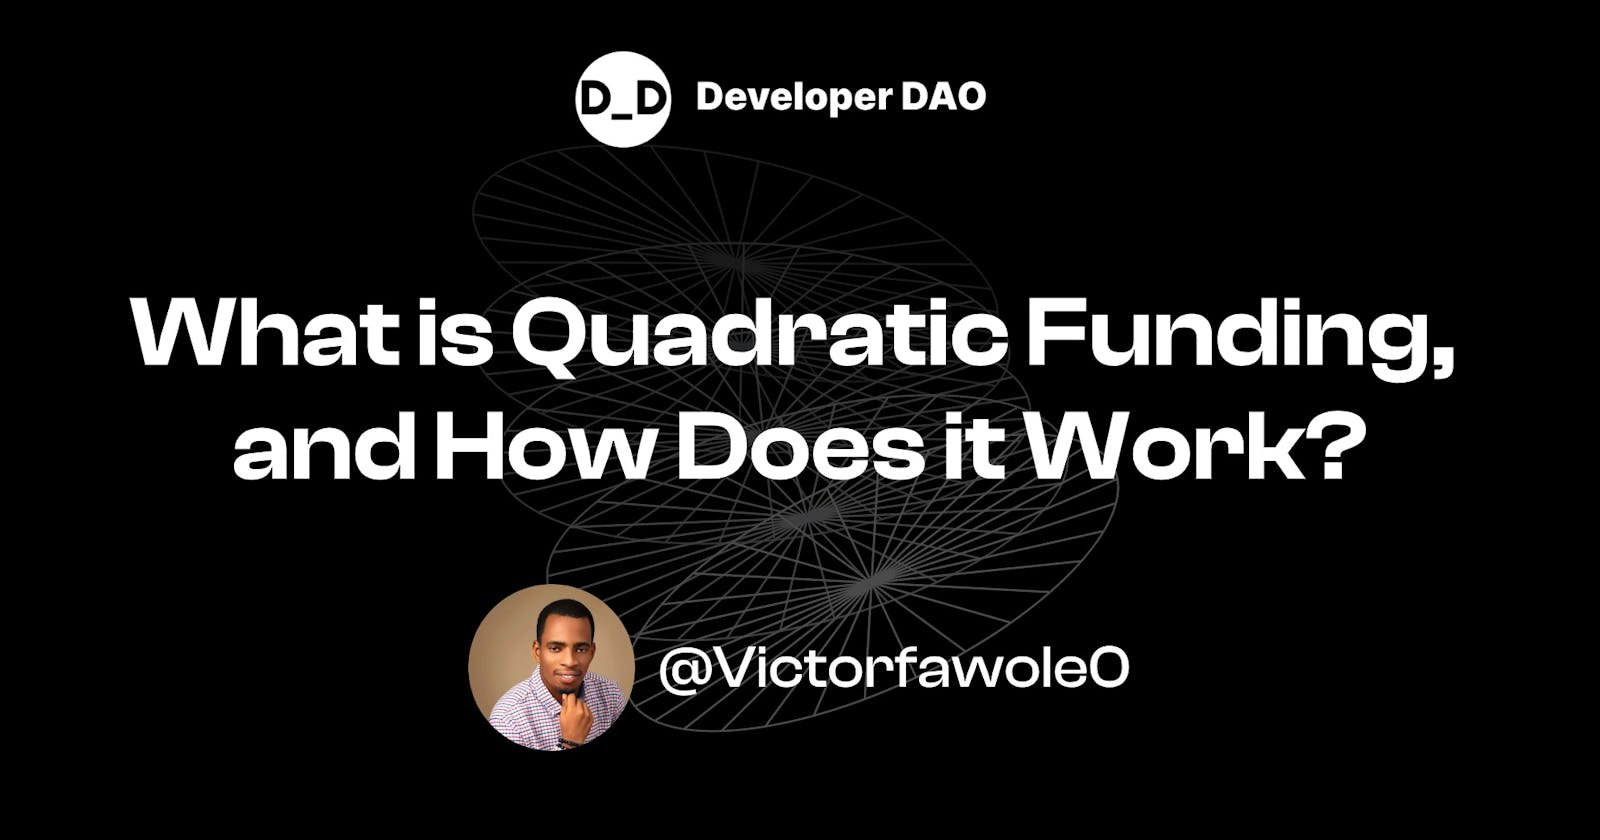 What is Quadratic Funding, and How Does it Work?